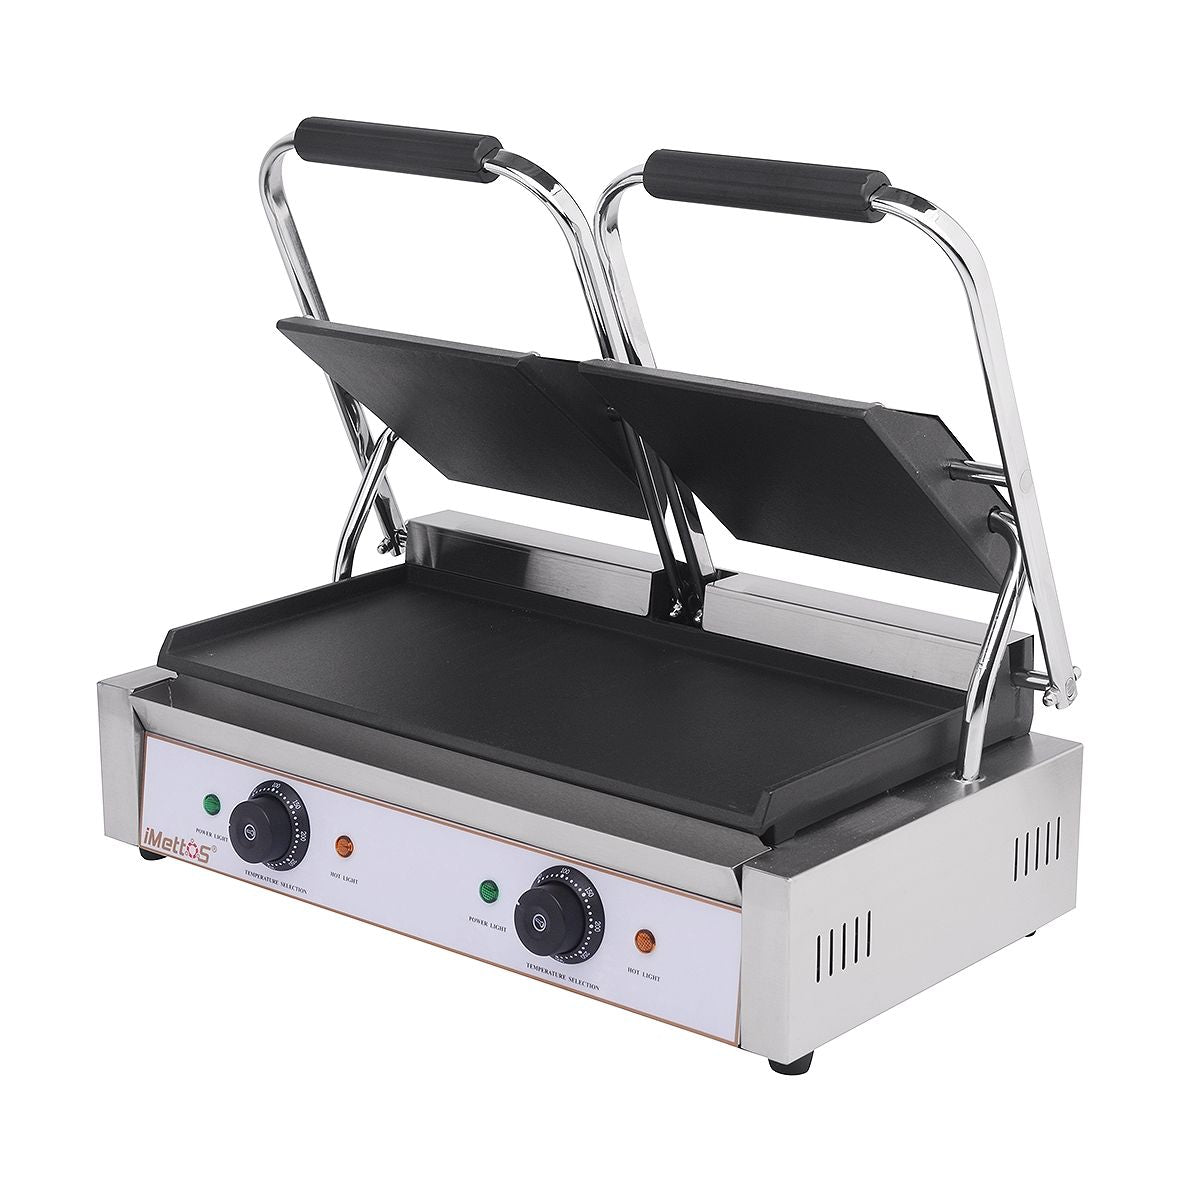 iMettos Contact Grill Twin / Smooth - 101018 Contact Grills & Panini Makers iMettos   